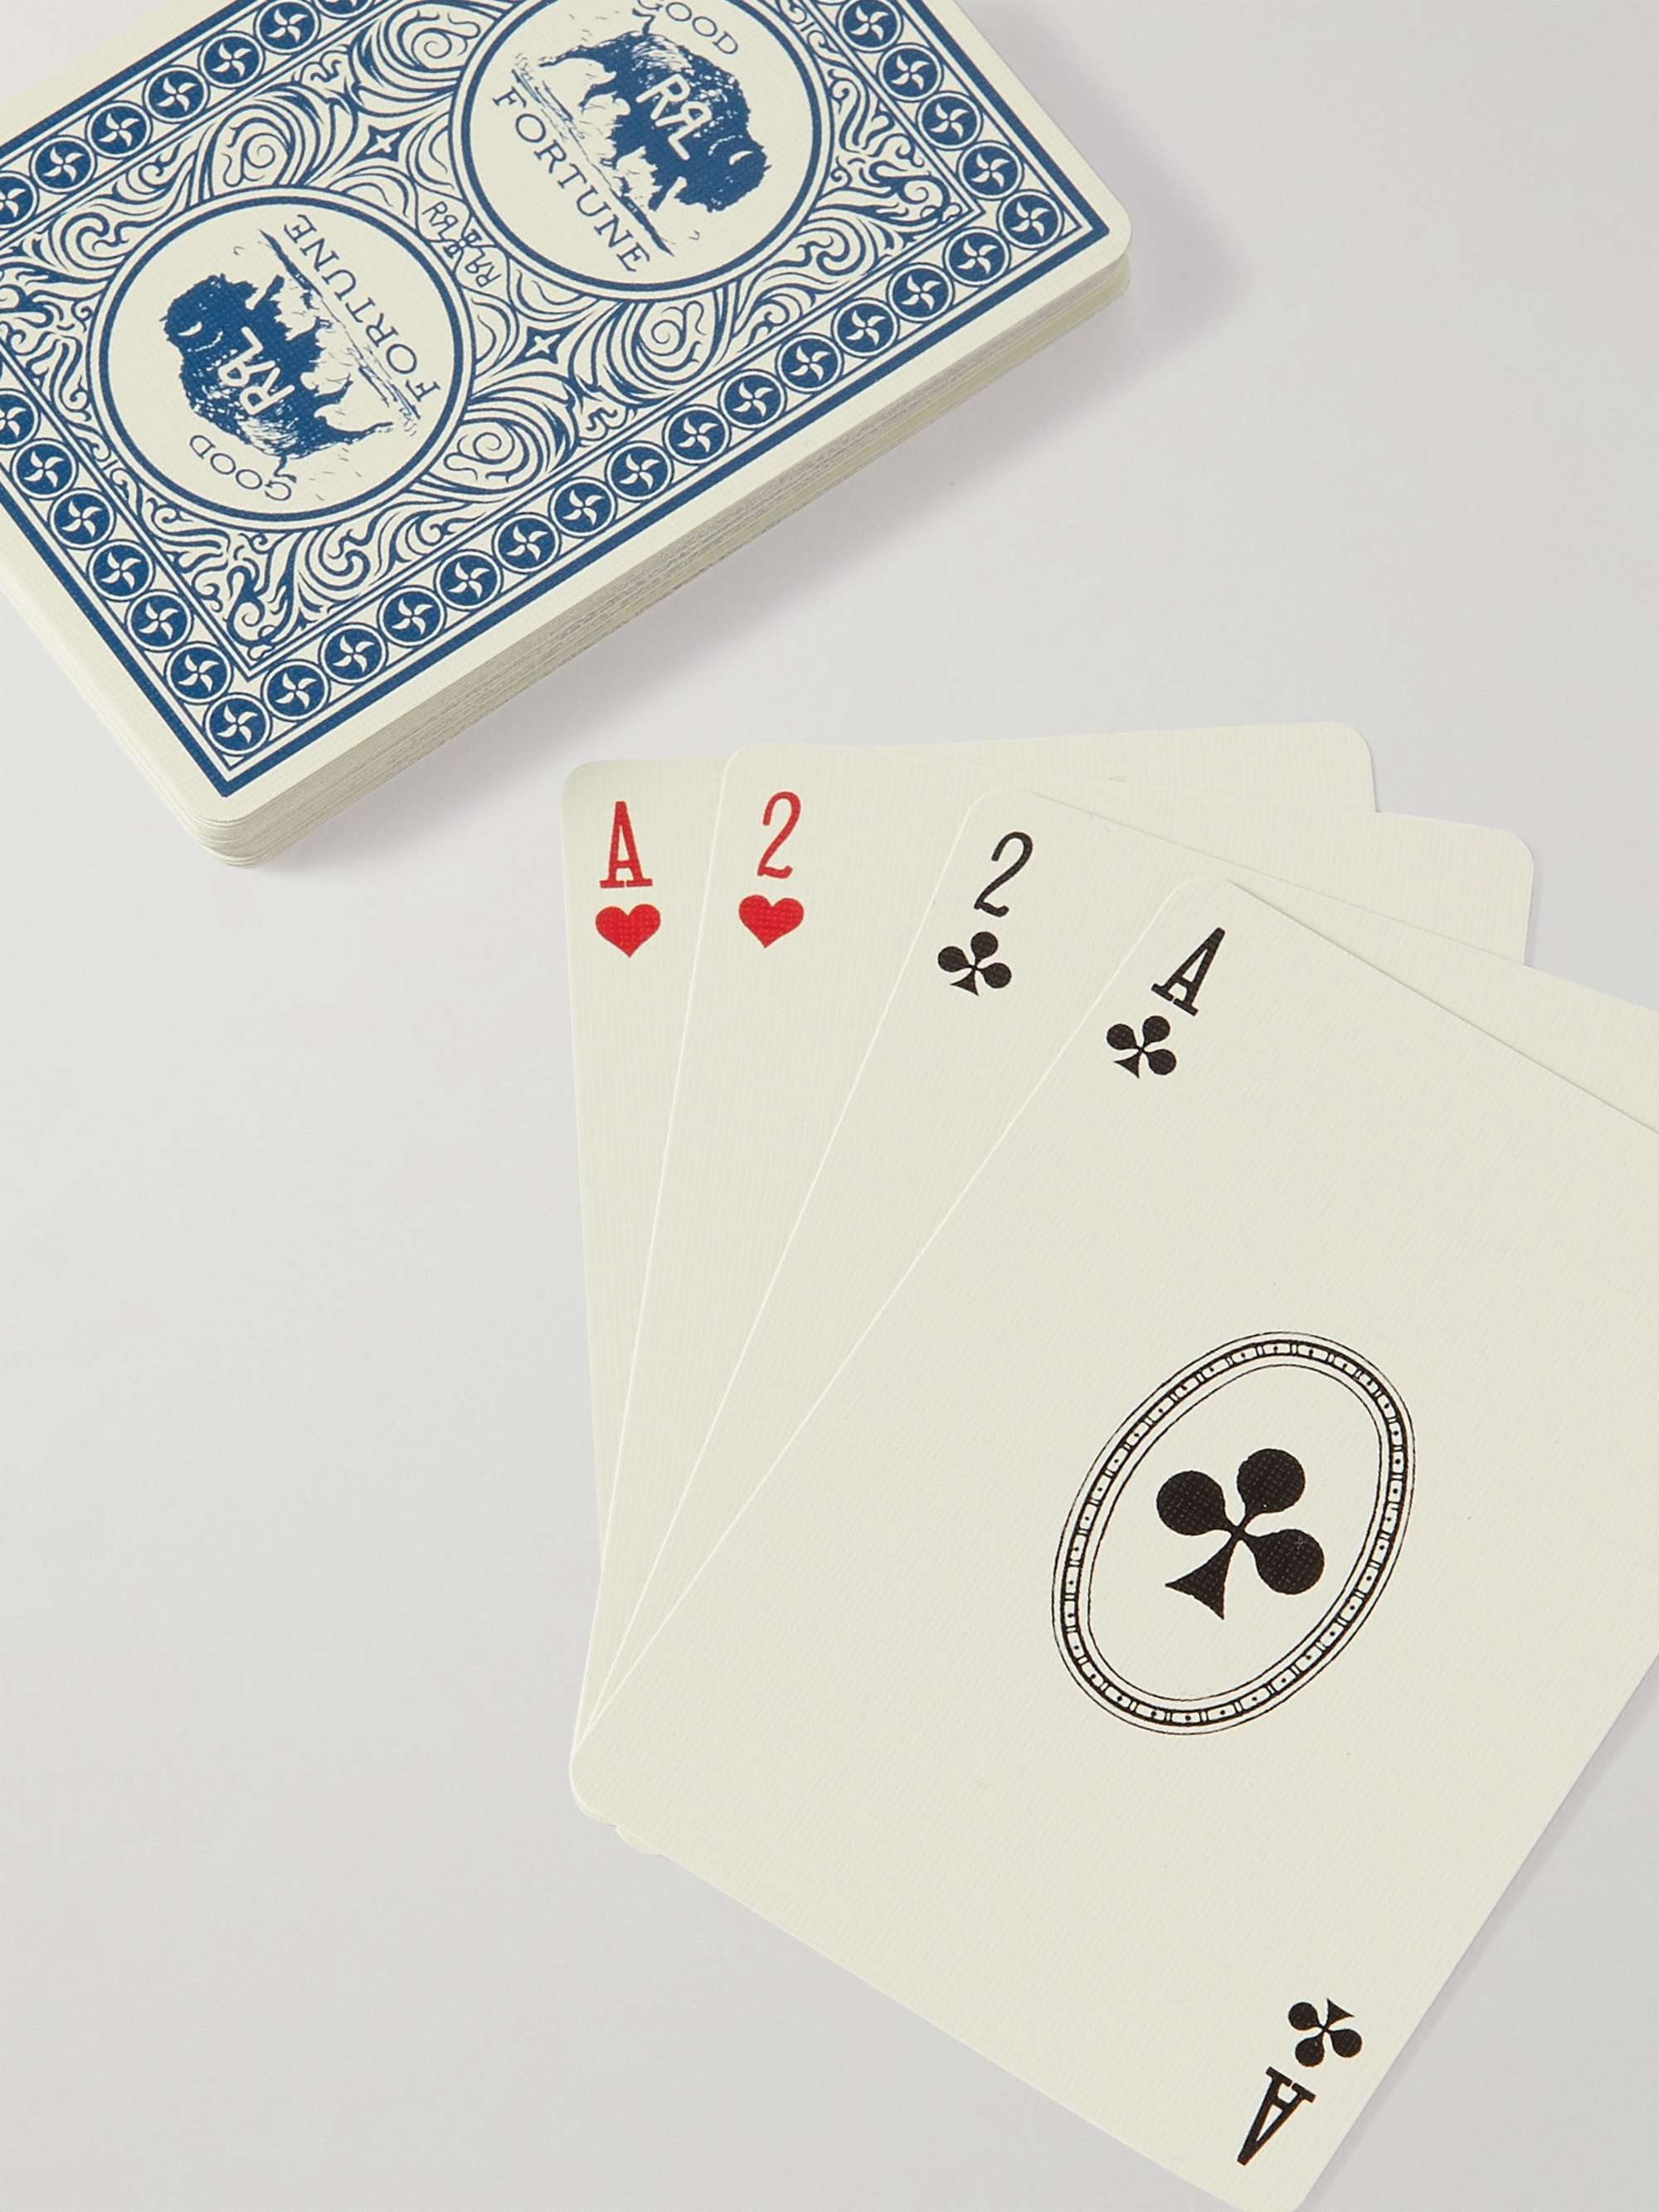 RRL Playing Cards